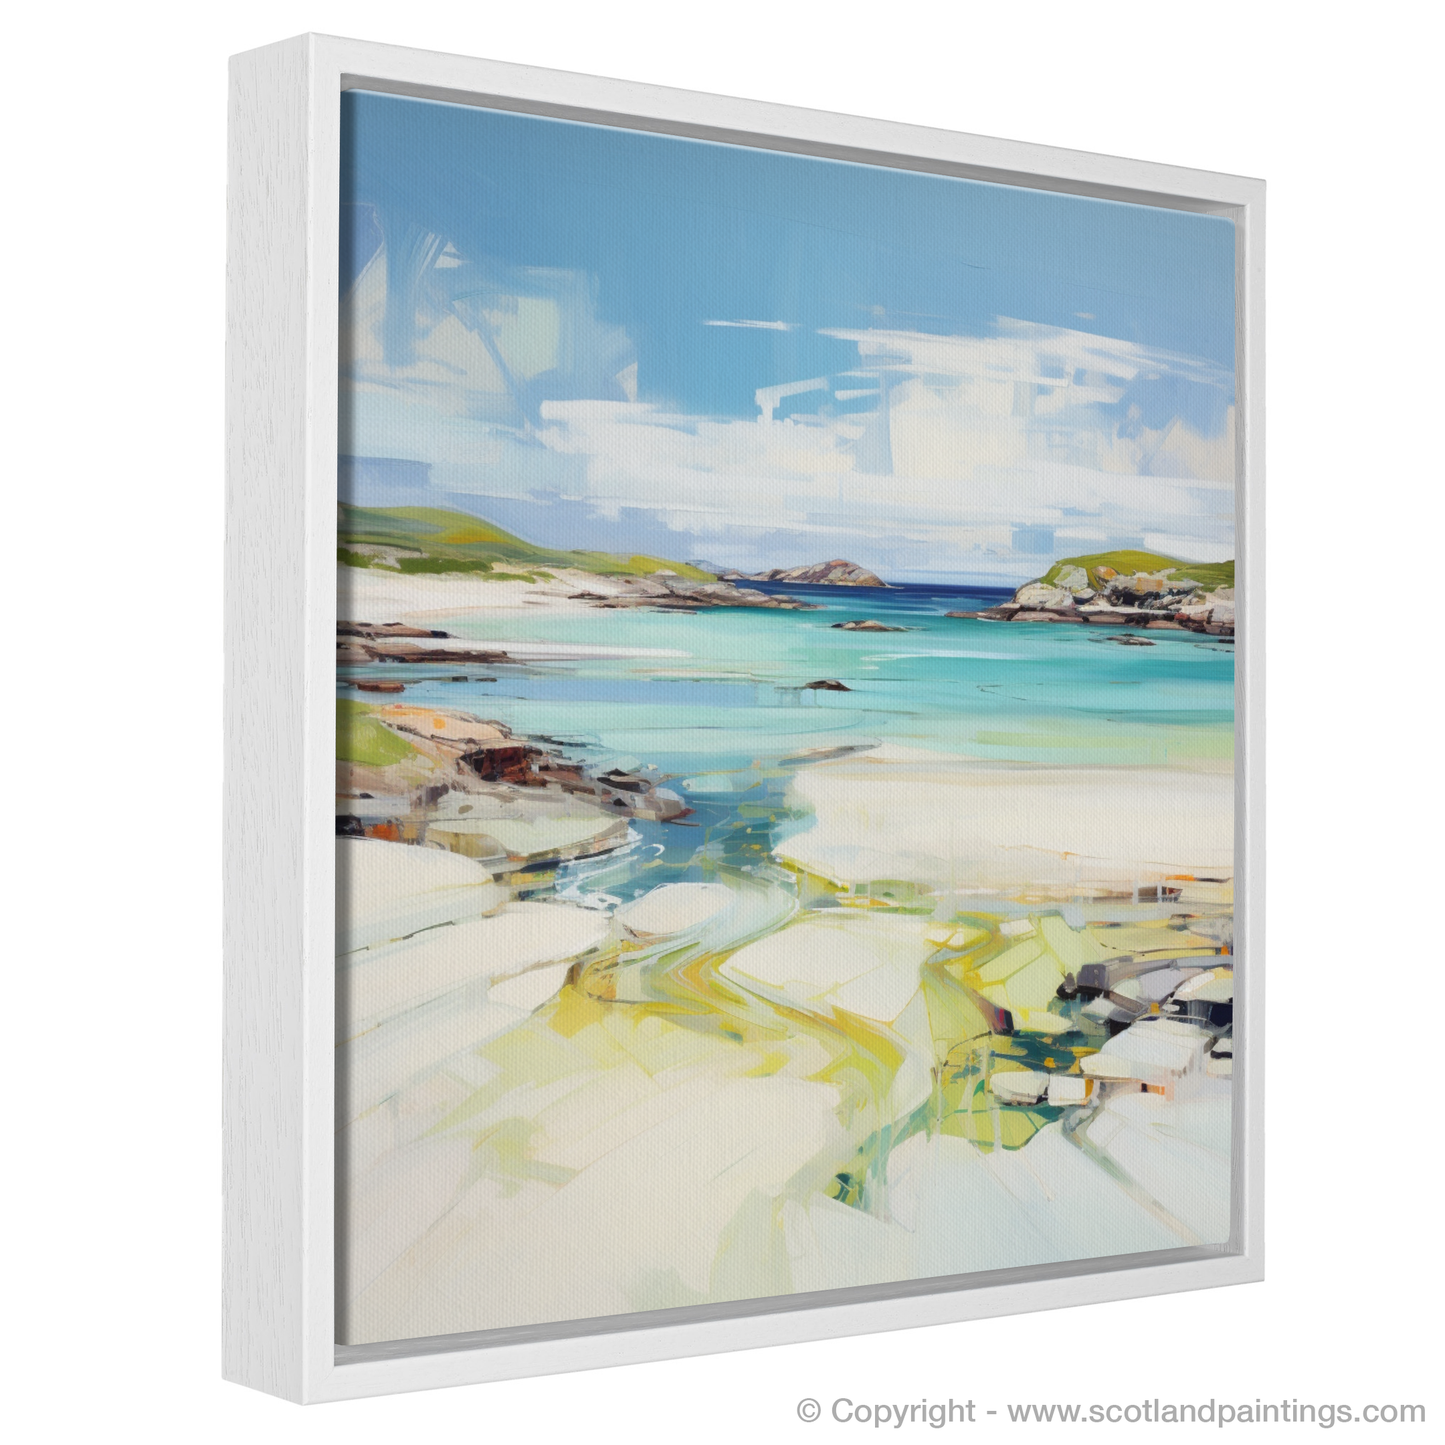 Painting and Art Print of Isle of Barra, Outer Hebrides in summer entitled "Summer Embrace of Isle of Barra".